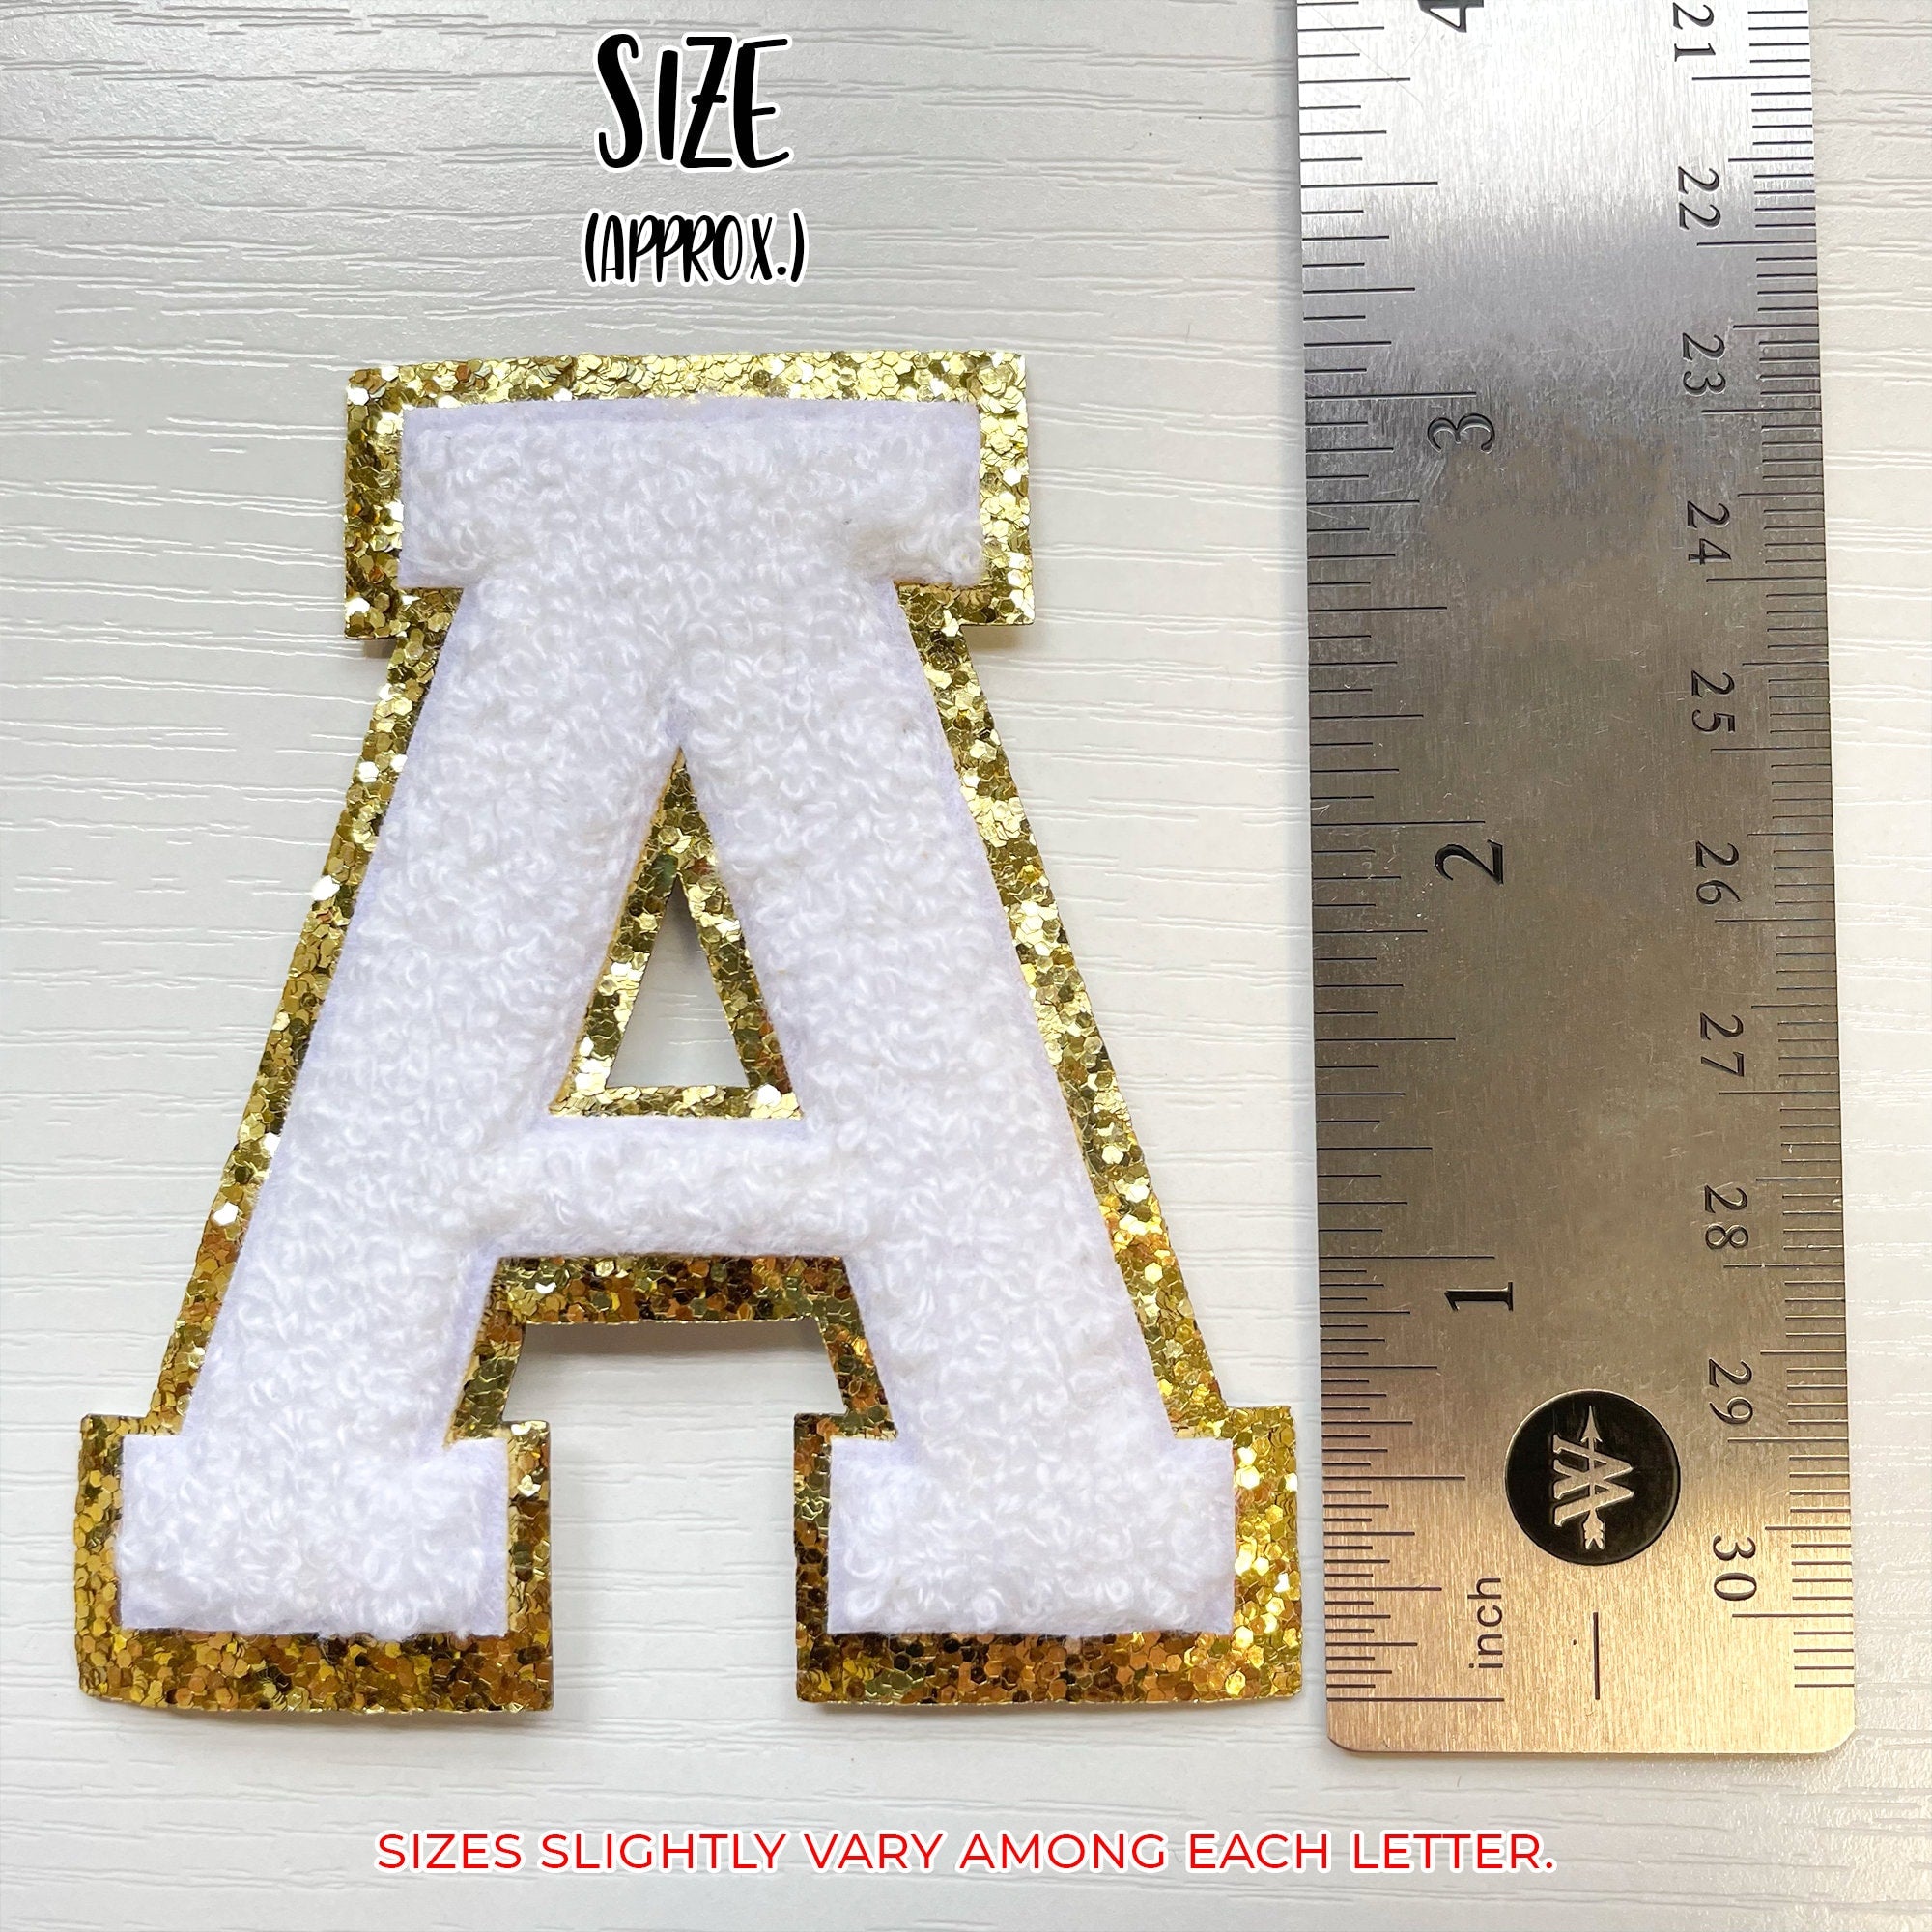 Iron-On Varsity Letter Patches, White Patches with Gold Trim, Chenille Patches, Glitter Letters, DIY Gift Ideas, Bachelorette Party Gift